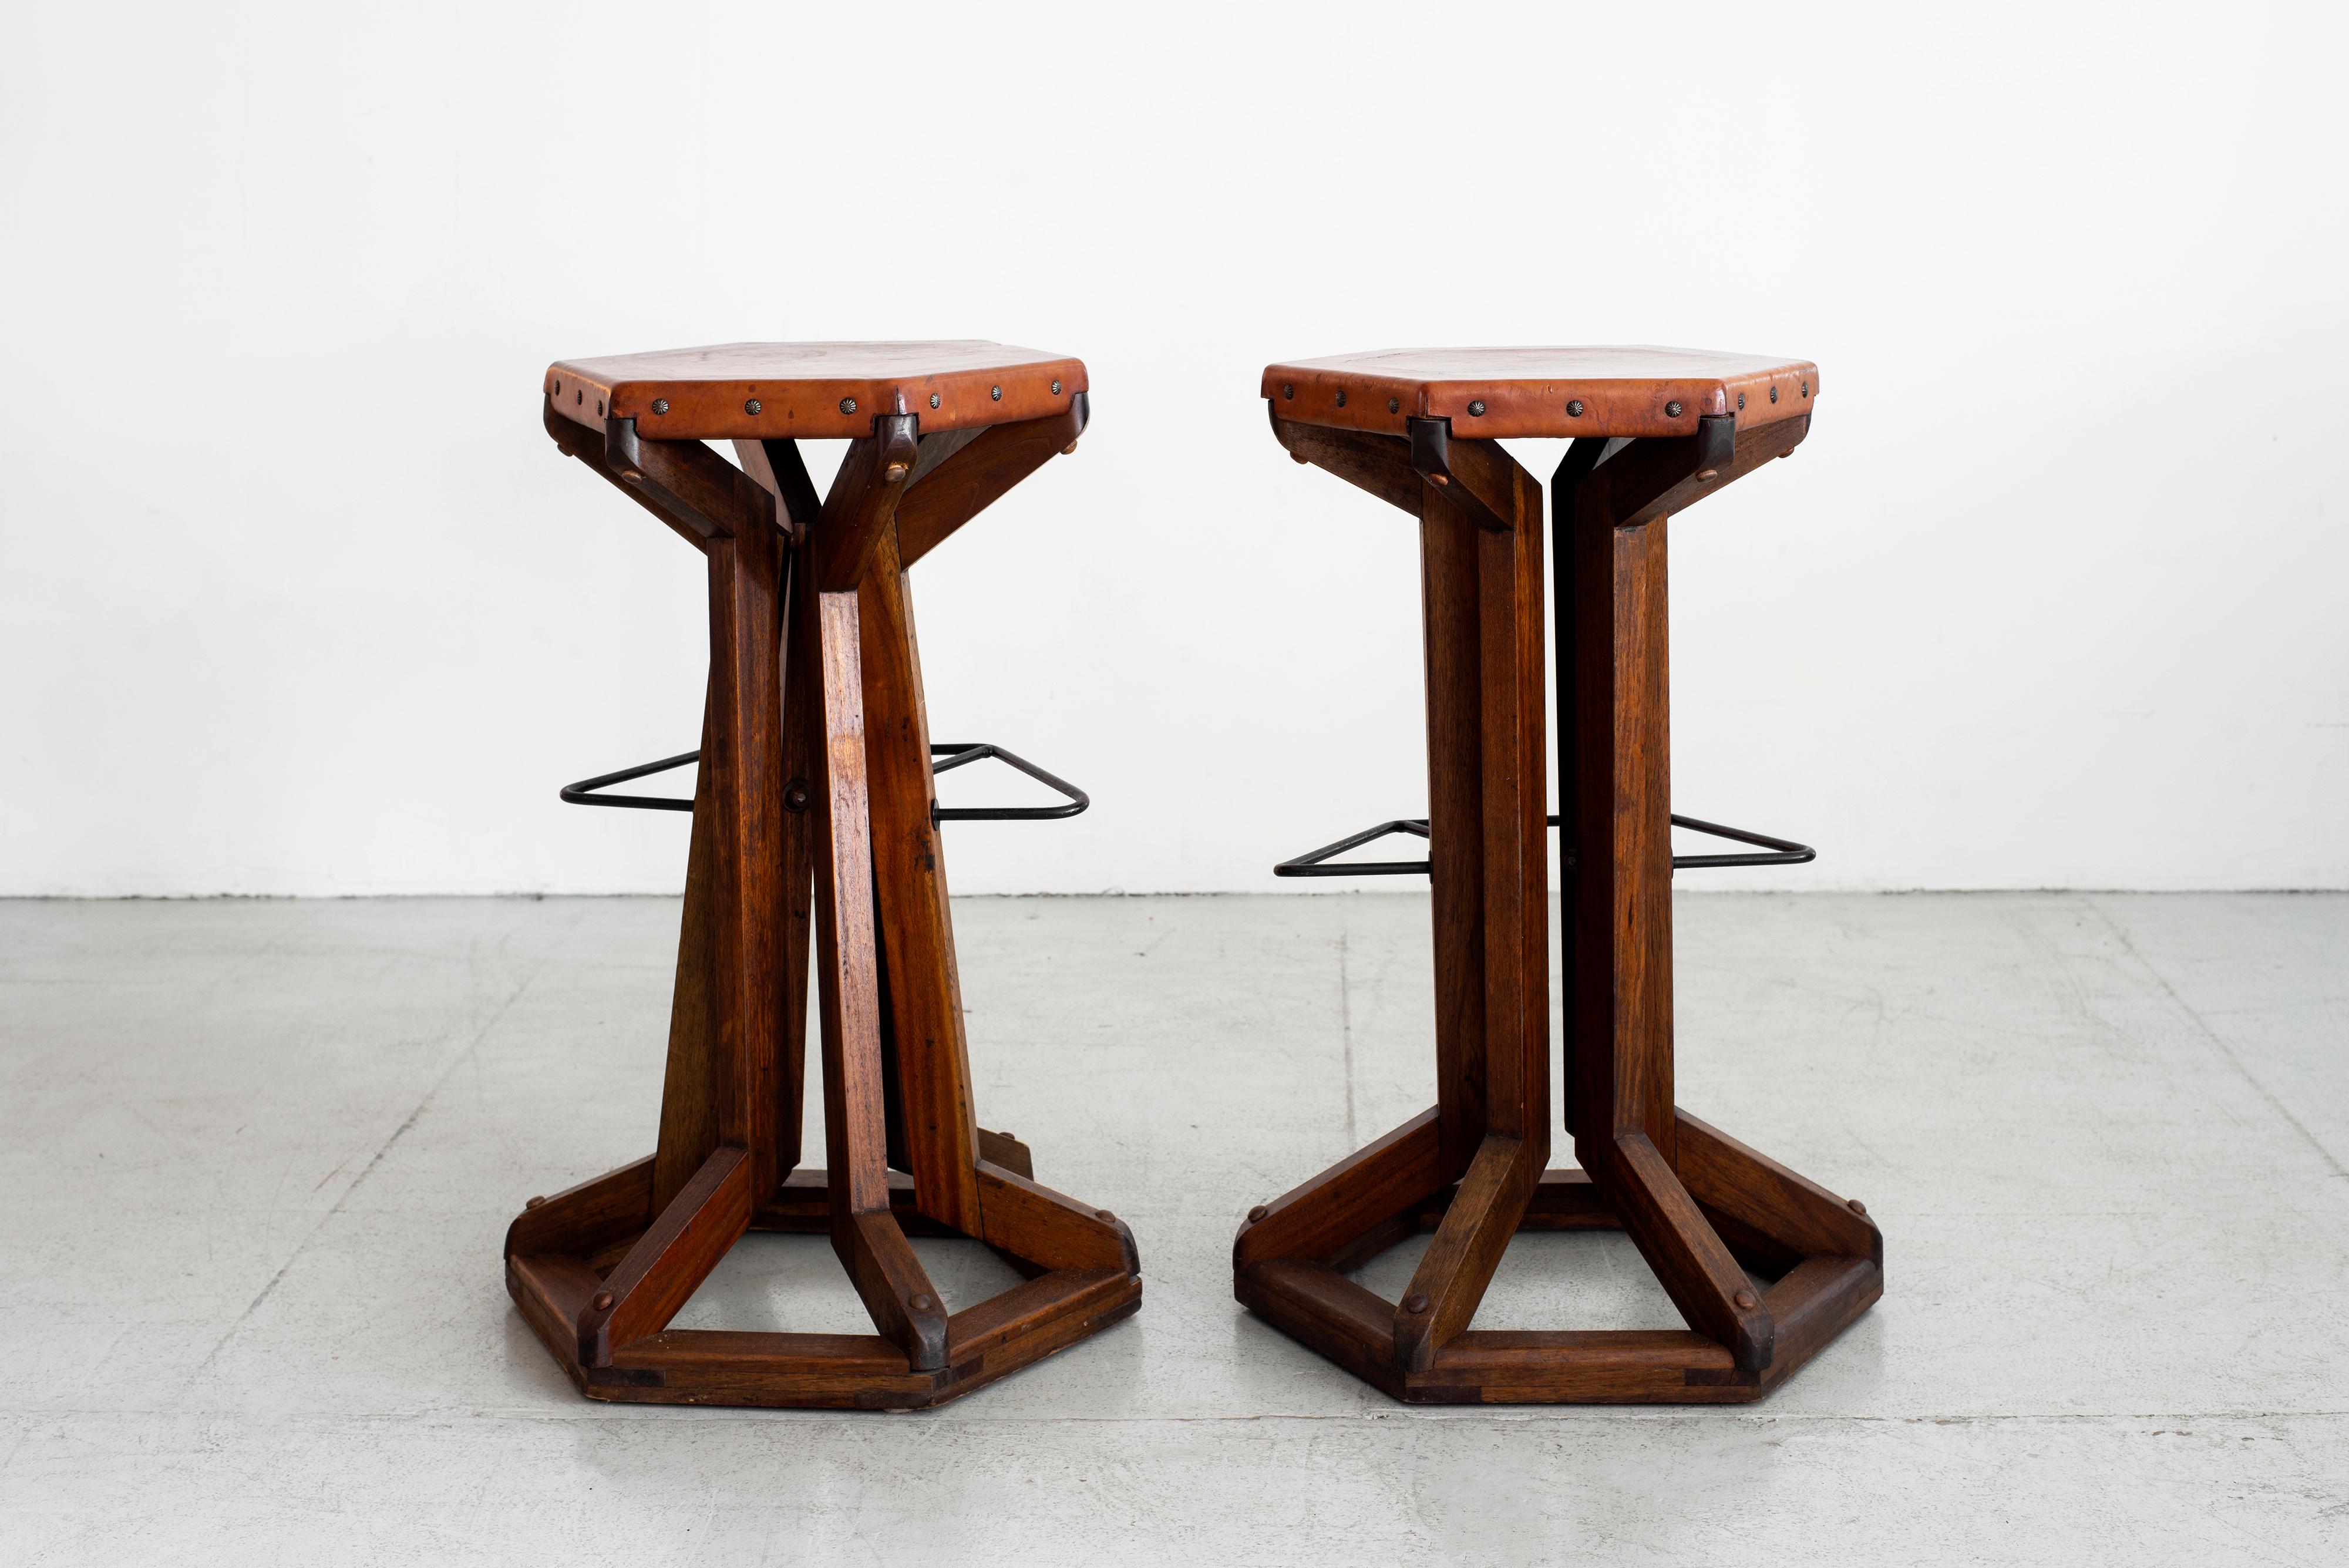 Unique pair of Arts & Craft bar stools with hexagon leather seats, brass tacks and iron metal foot stool. Great patina to wood and wonderful overall craftsmanship.